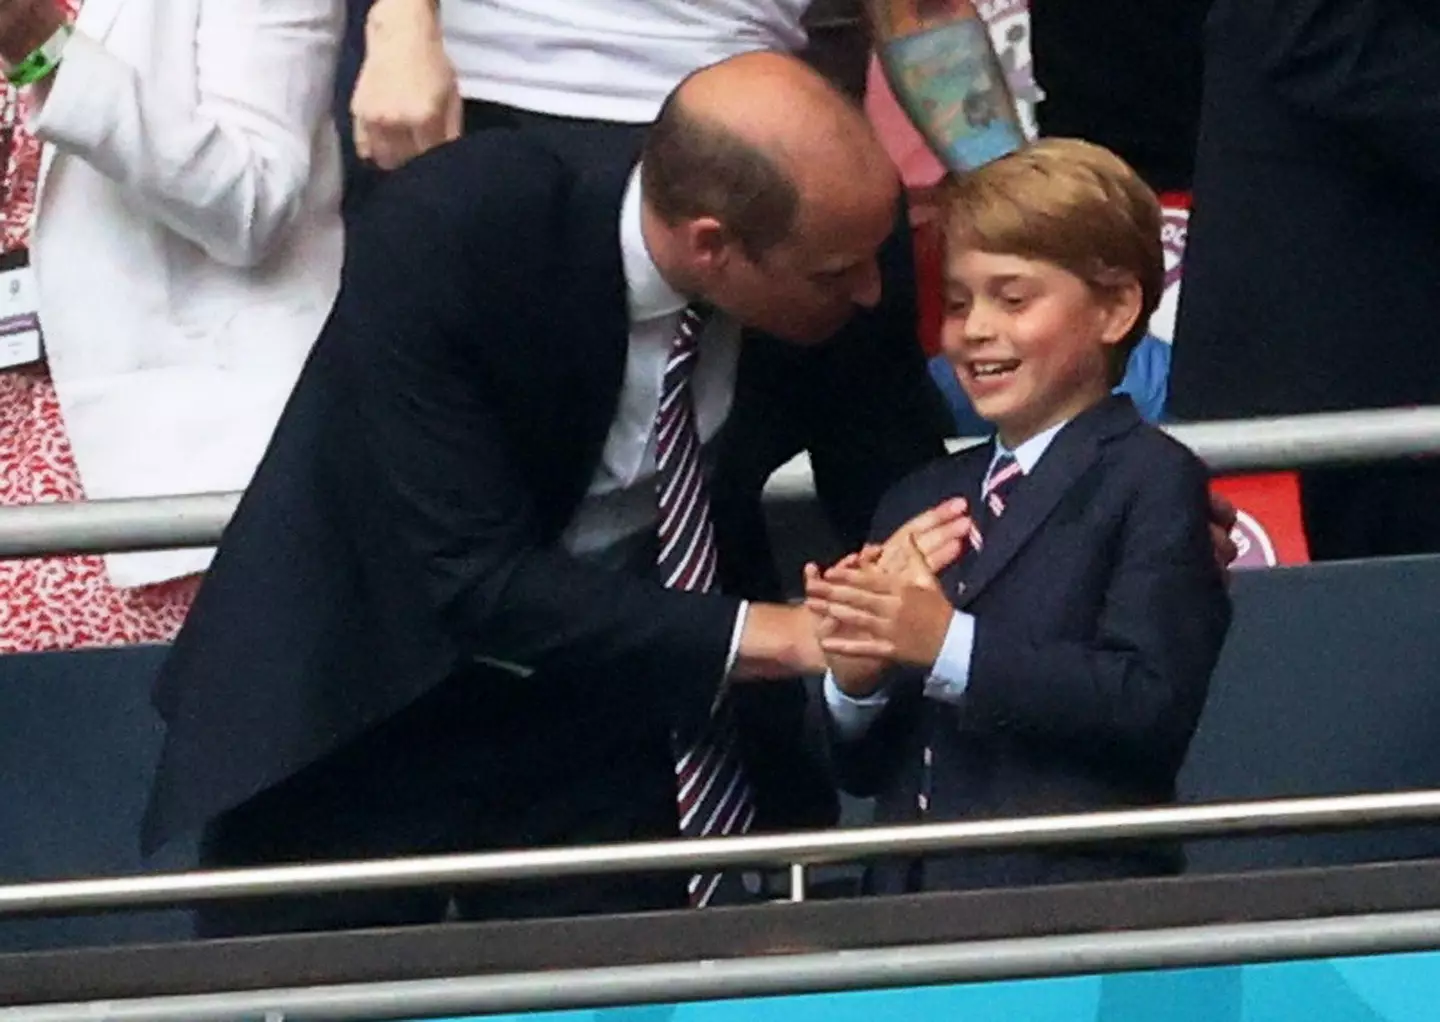 The episode features Prince George and Prince William's interests (